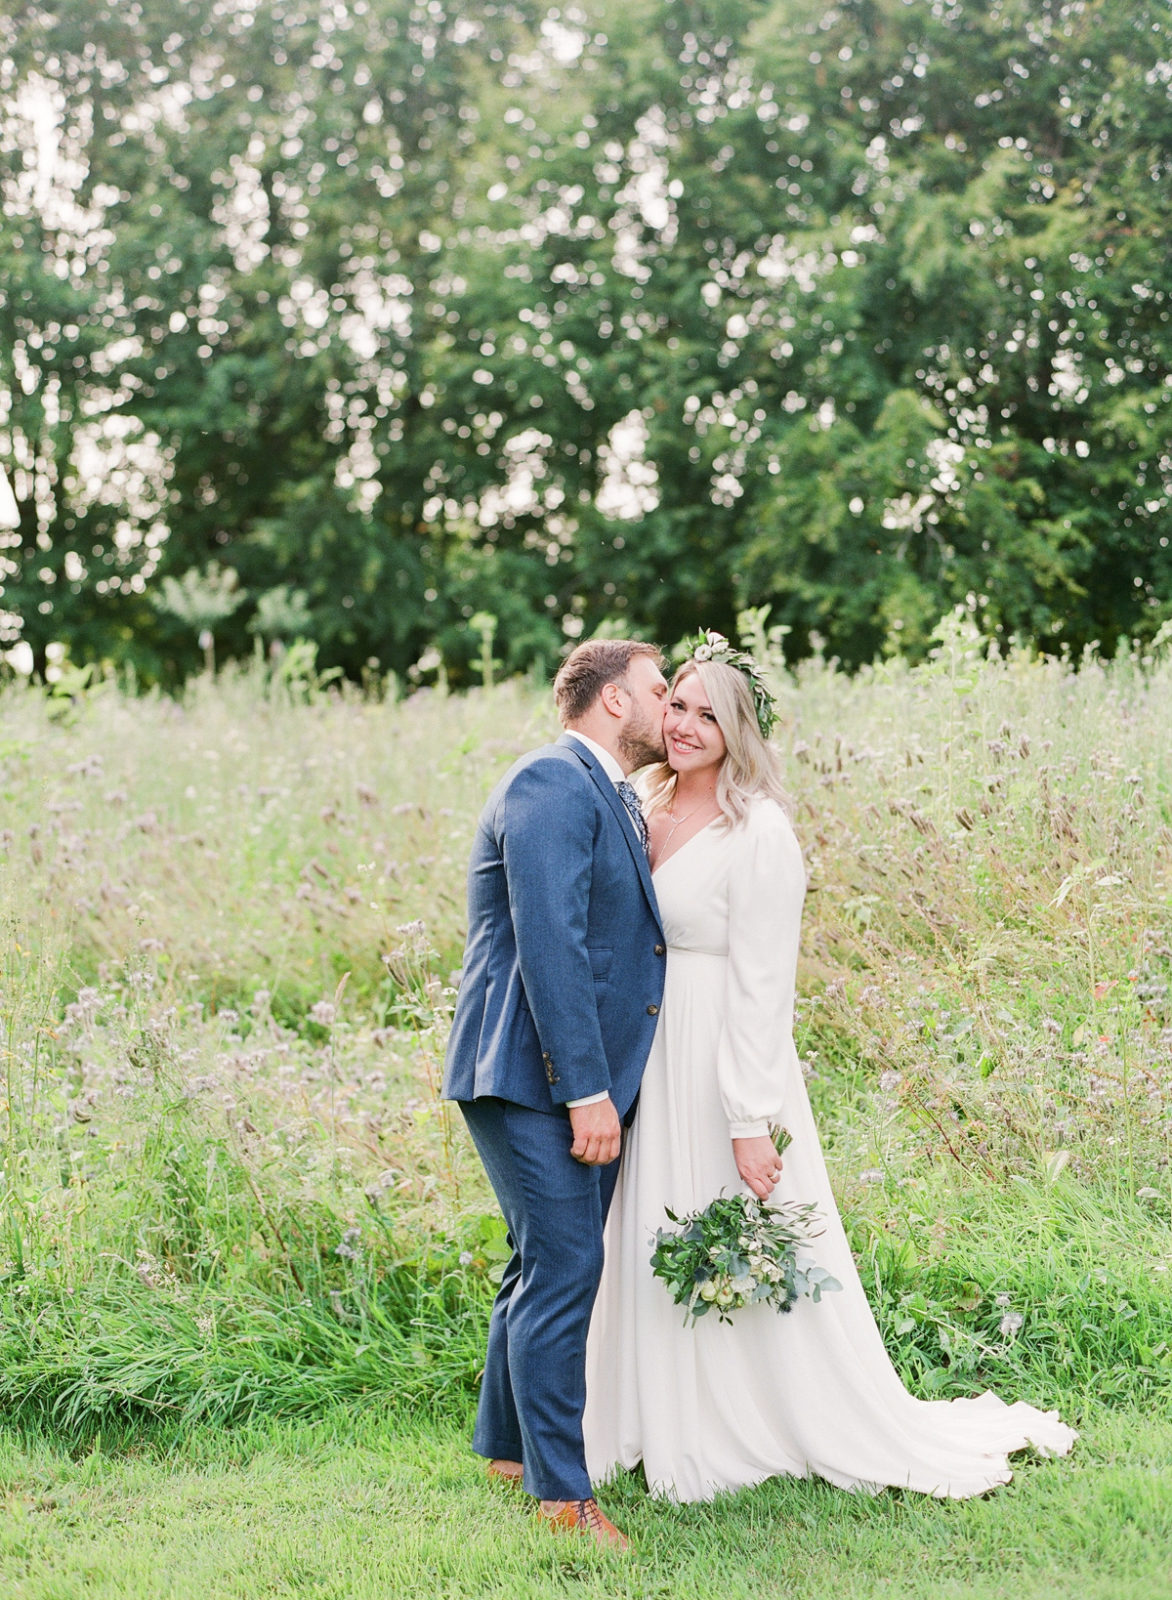 Normandy Wedding Photographer | France Destination Wedding | Molly Carr Photography | Bride and Groom in Field